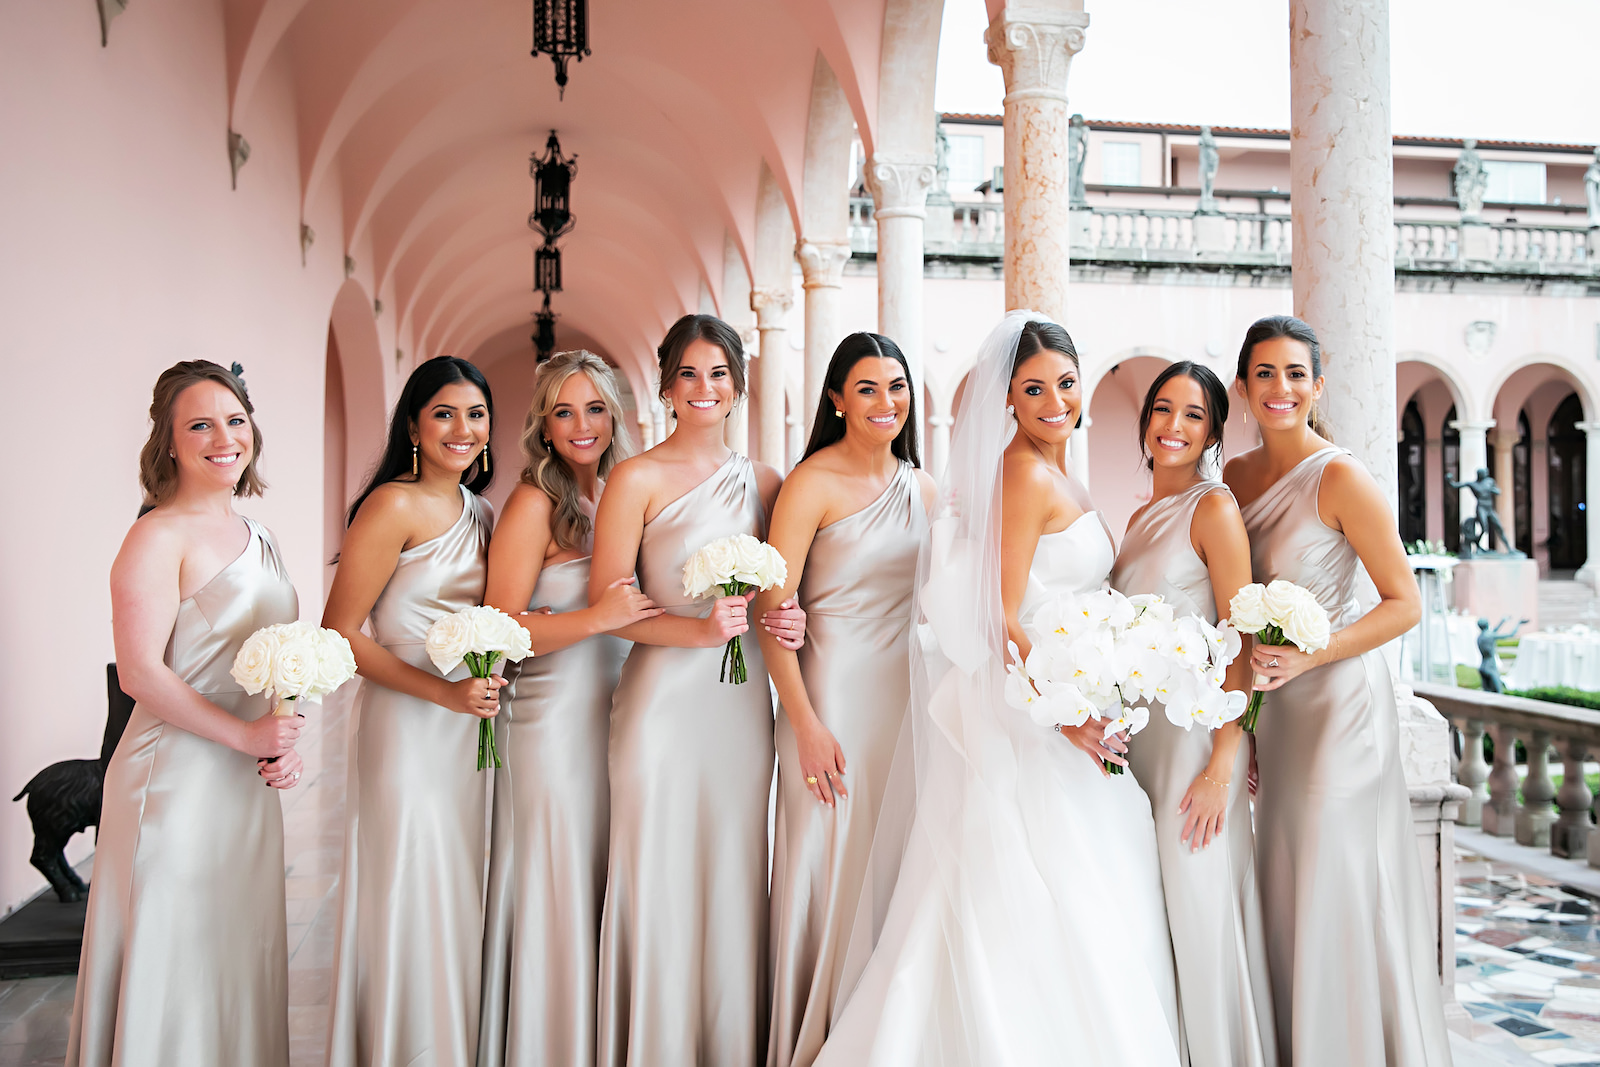 Luxurious Modern Chic Bride and Bridesmaids in Matching Champagne Dresses | Tampa Bay Wedding Photographer Limelight Photography | Sarasota Wedding Venue Ringling Museum